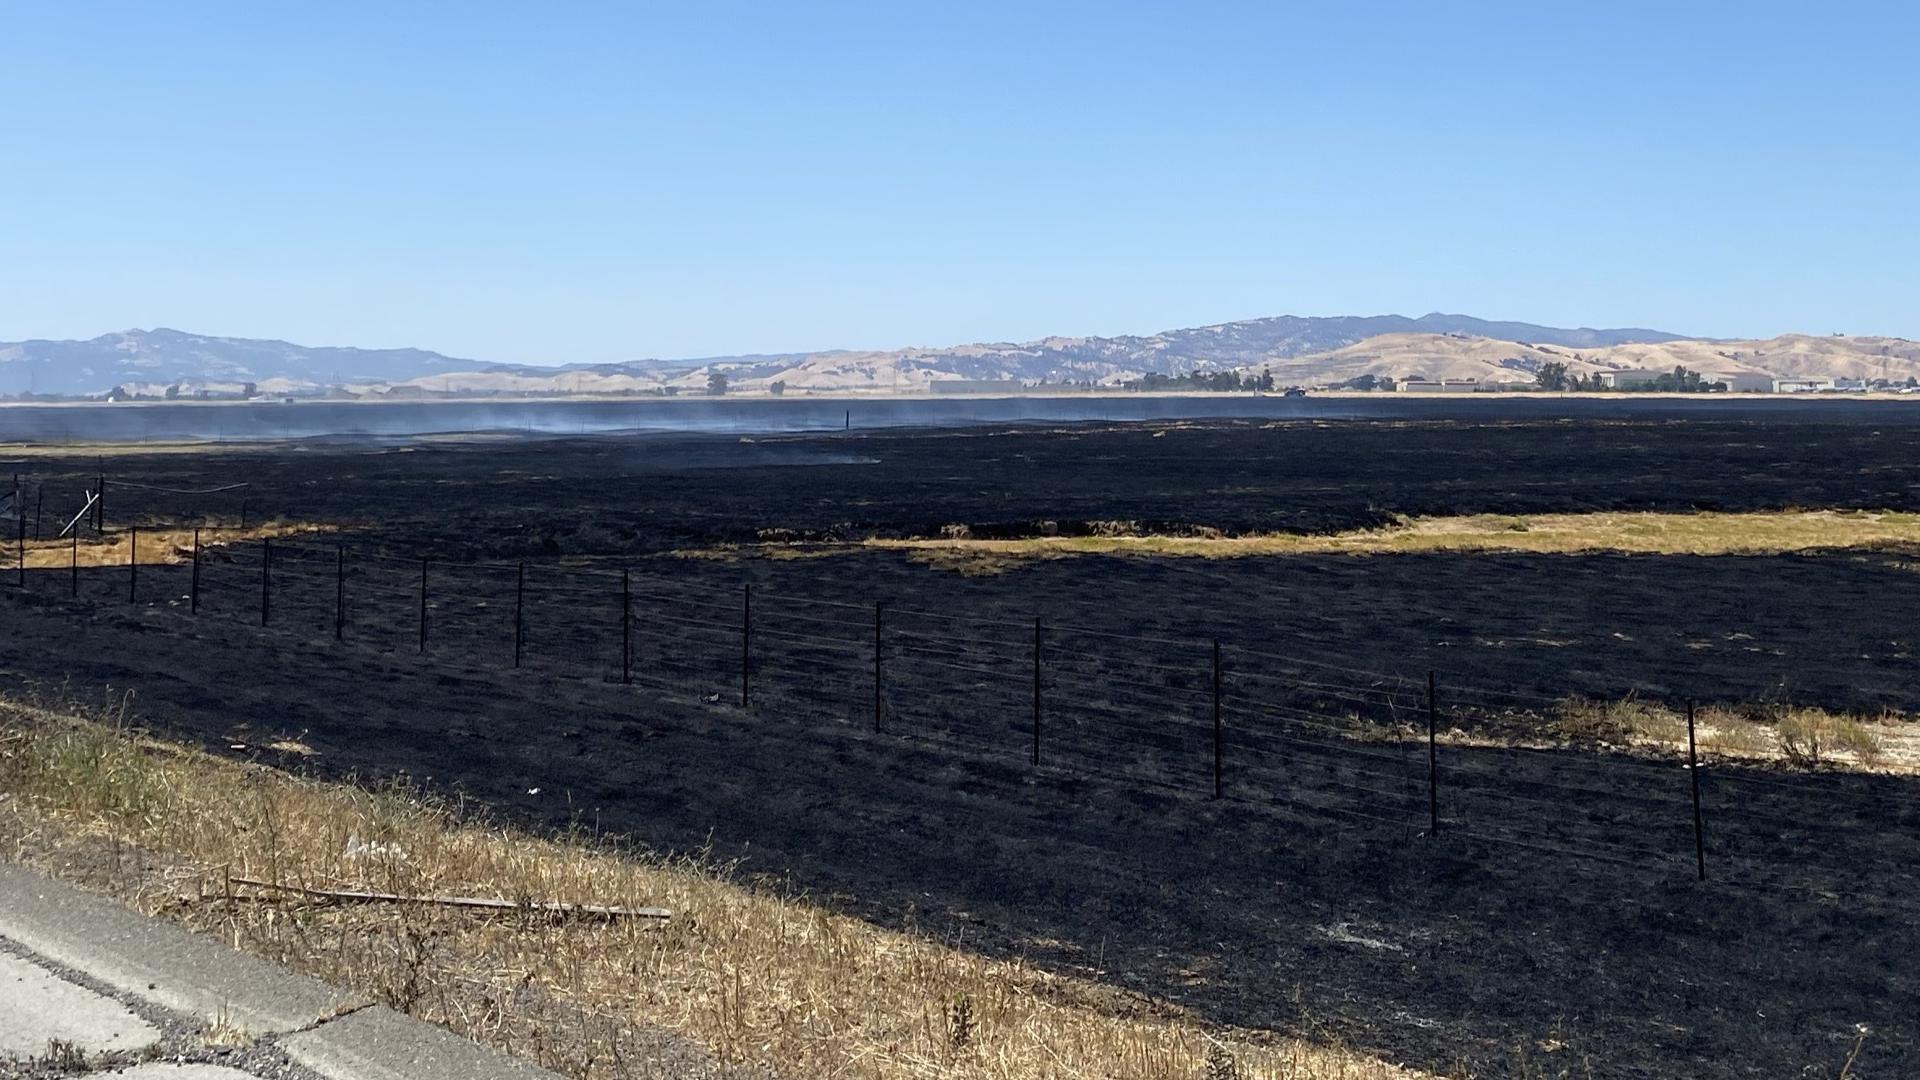 More than 470 acres burned in the fire near Travis Air Force Base as PG&E shut power off for some residents in an attempt to ease fire concerns.